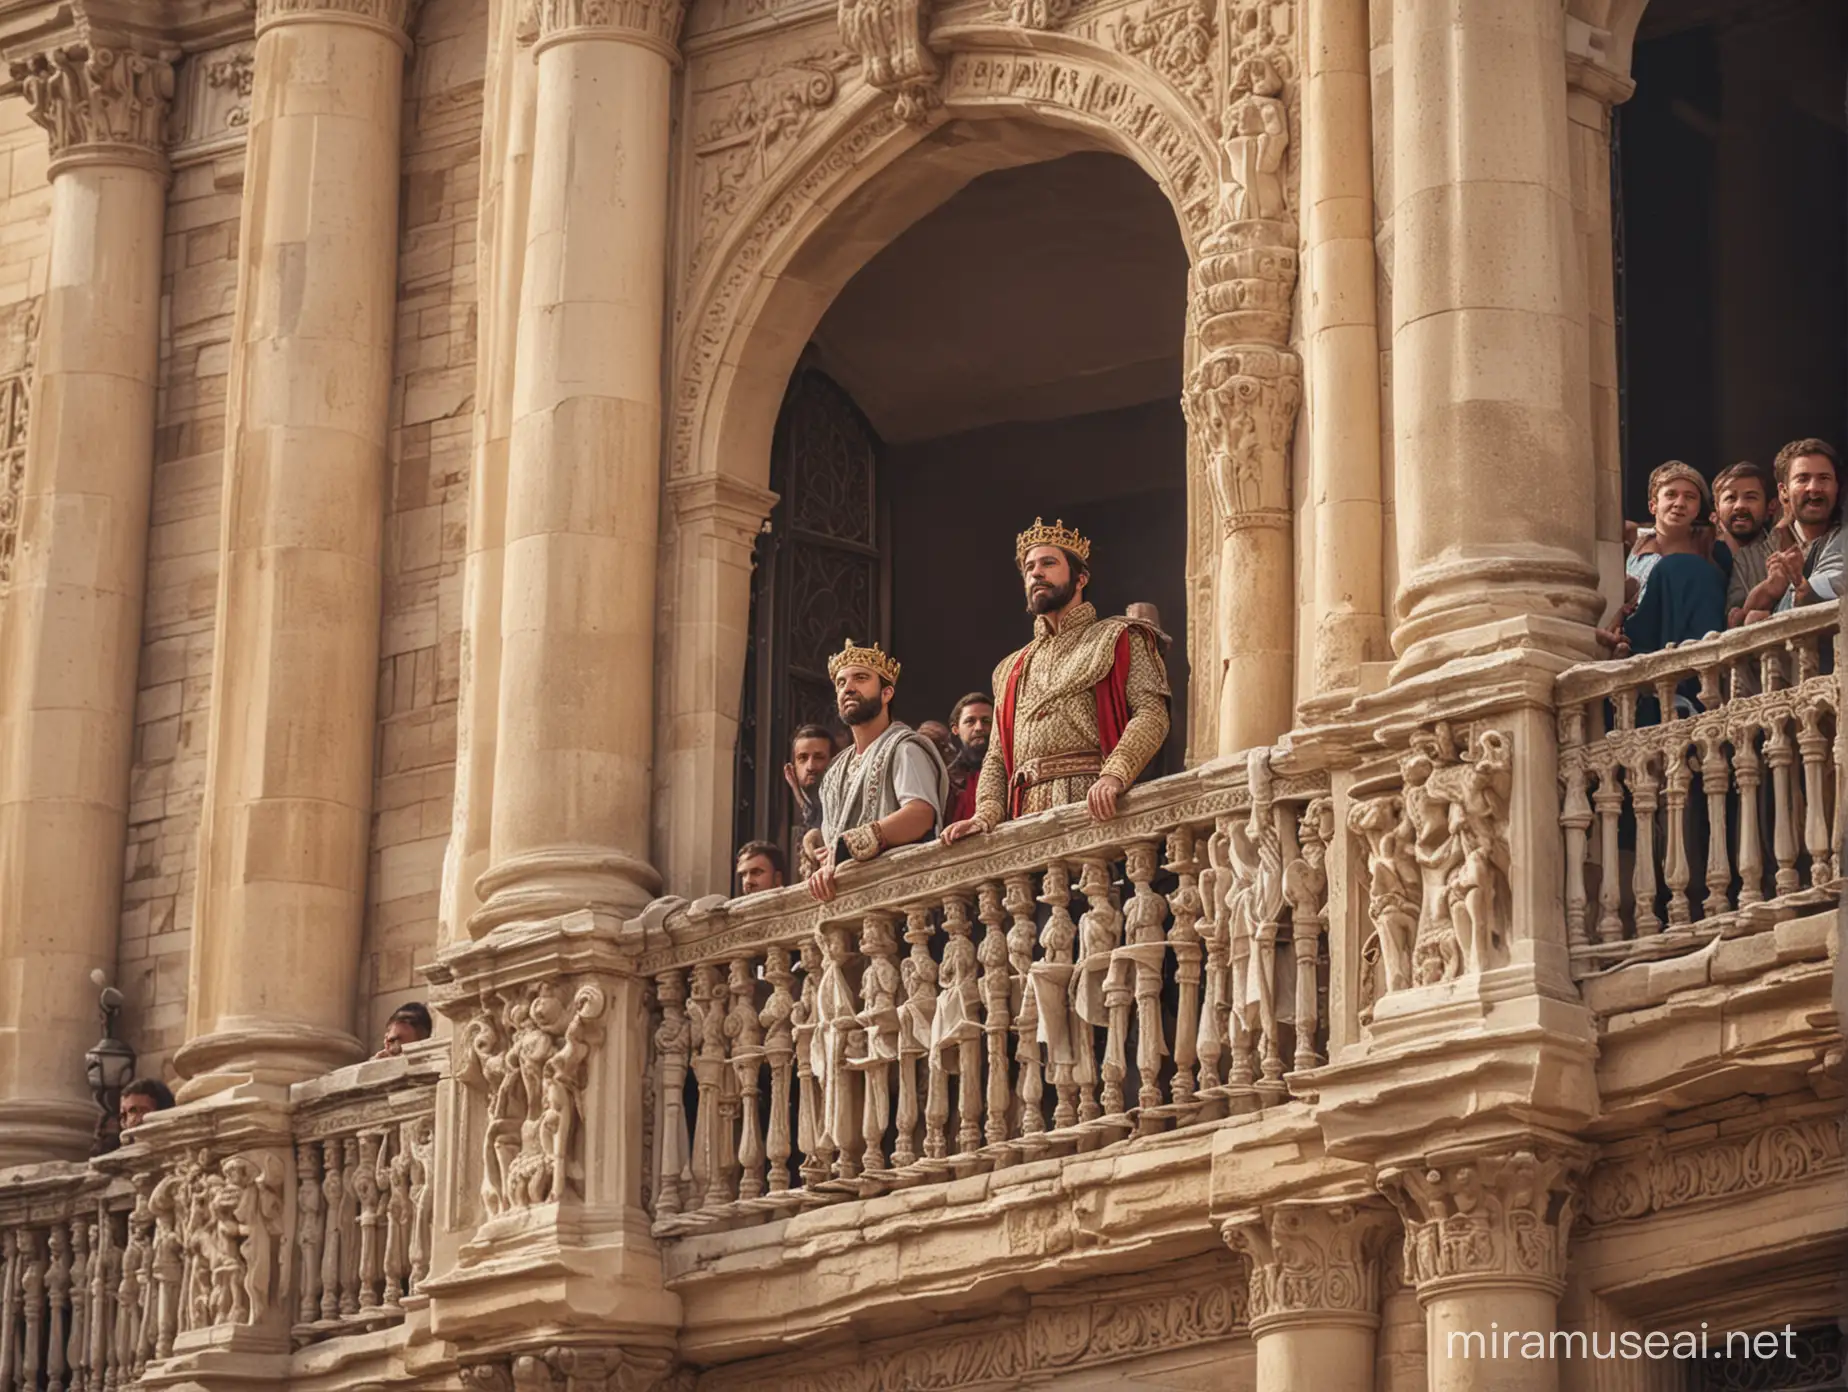 Young king with beard standing out of the balcony of his palace and looking down at the huge crowd gathered.